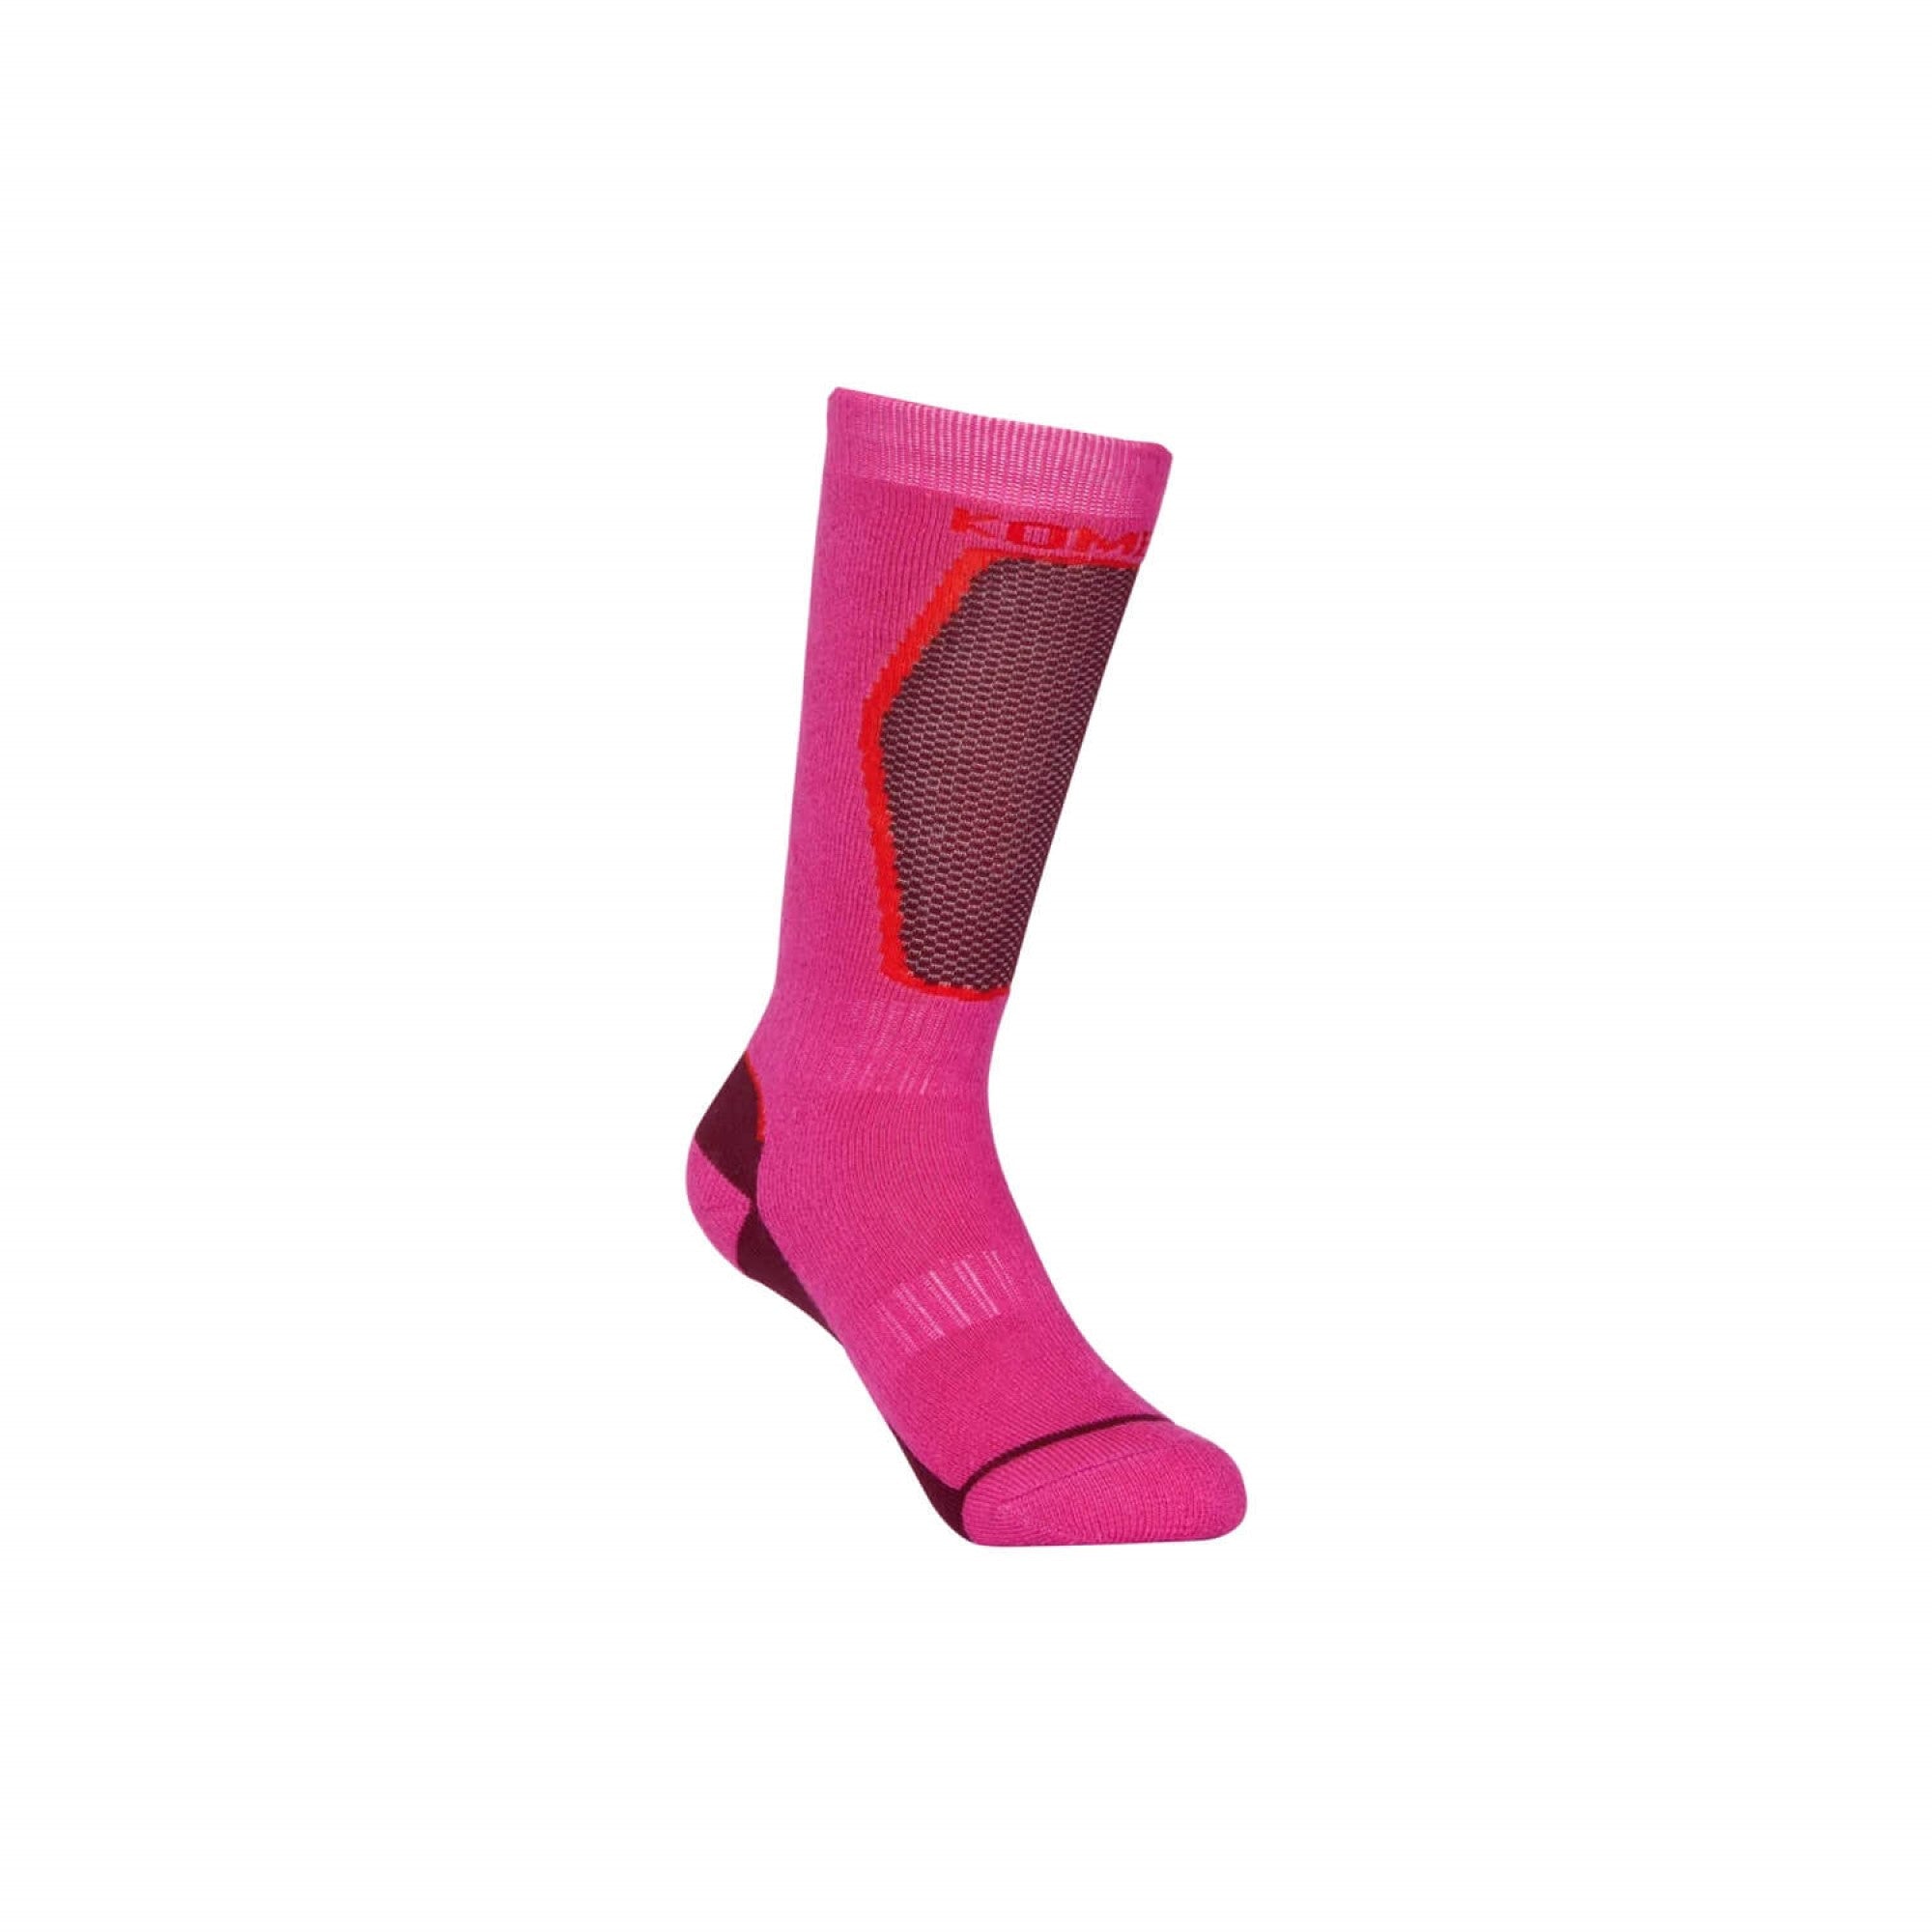 Kombi 'The Brave' Mid-weight Ski Socks - Mountain Kids Outfitters